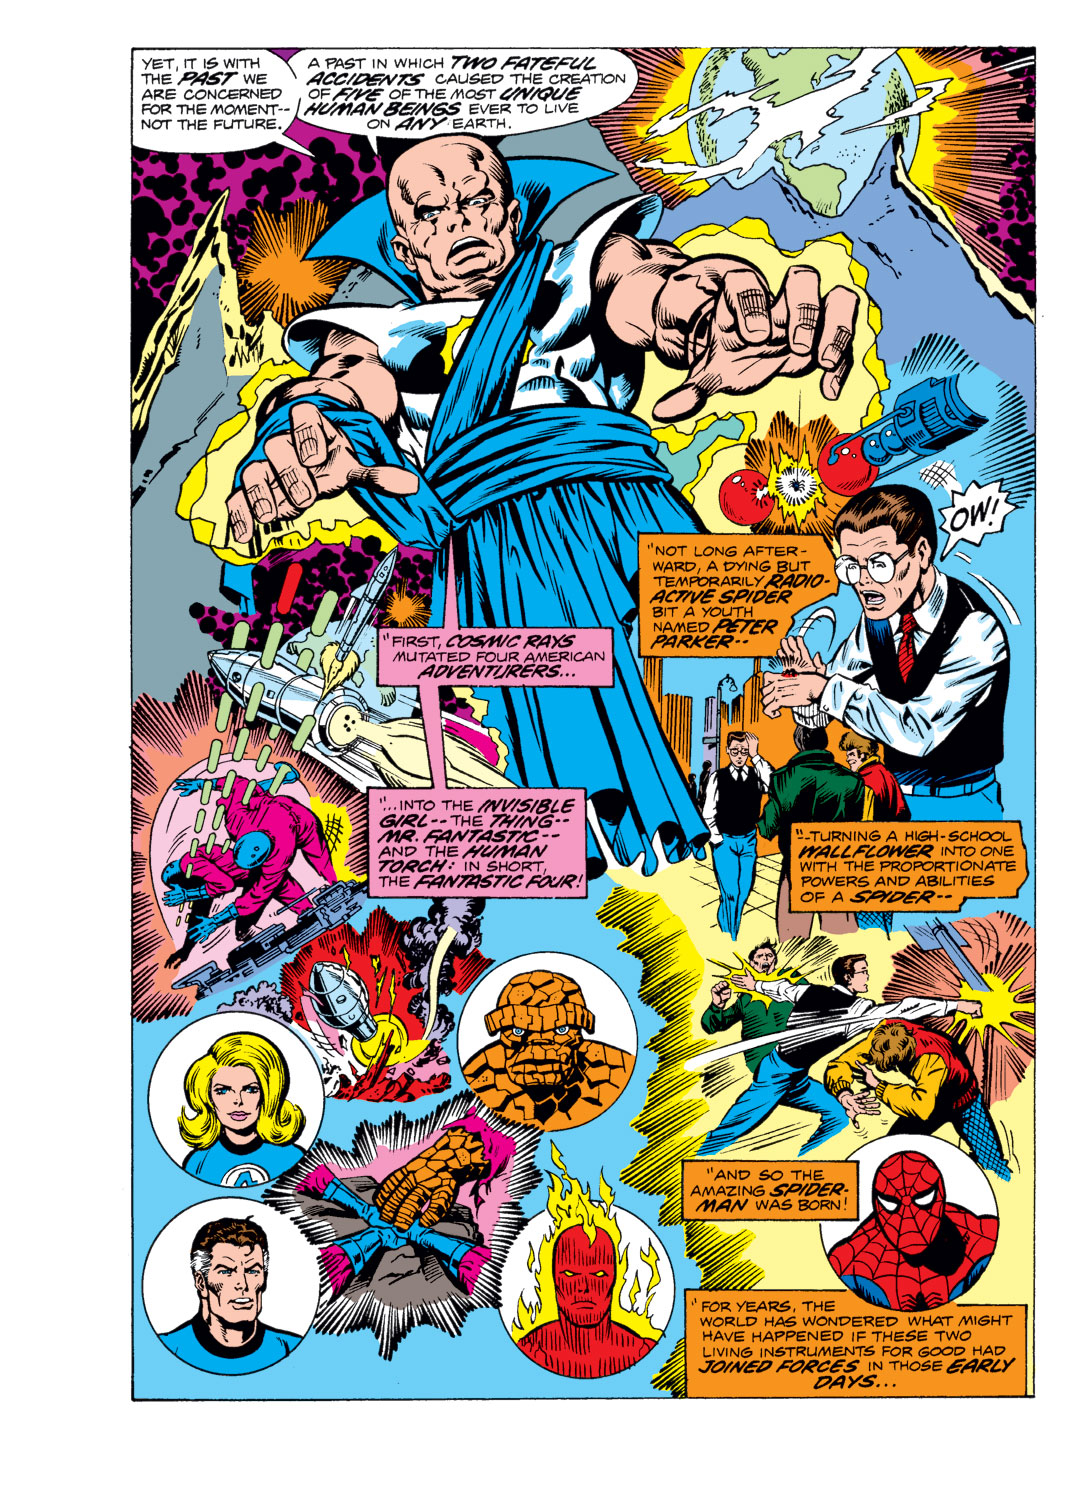 What If? (1977) issue 1 - Spider-Man joined the Fantastic Four - Page 5